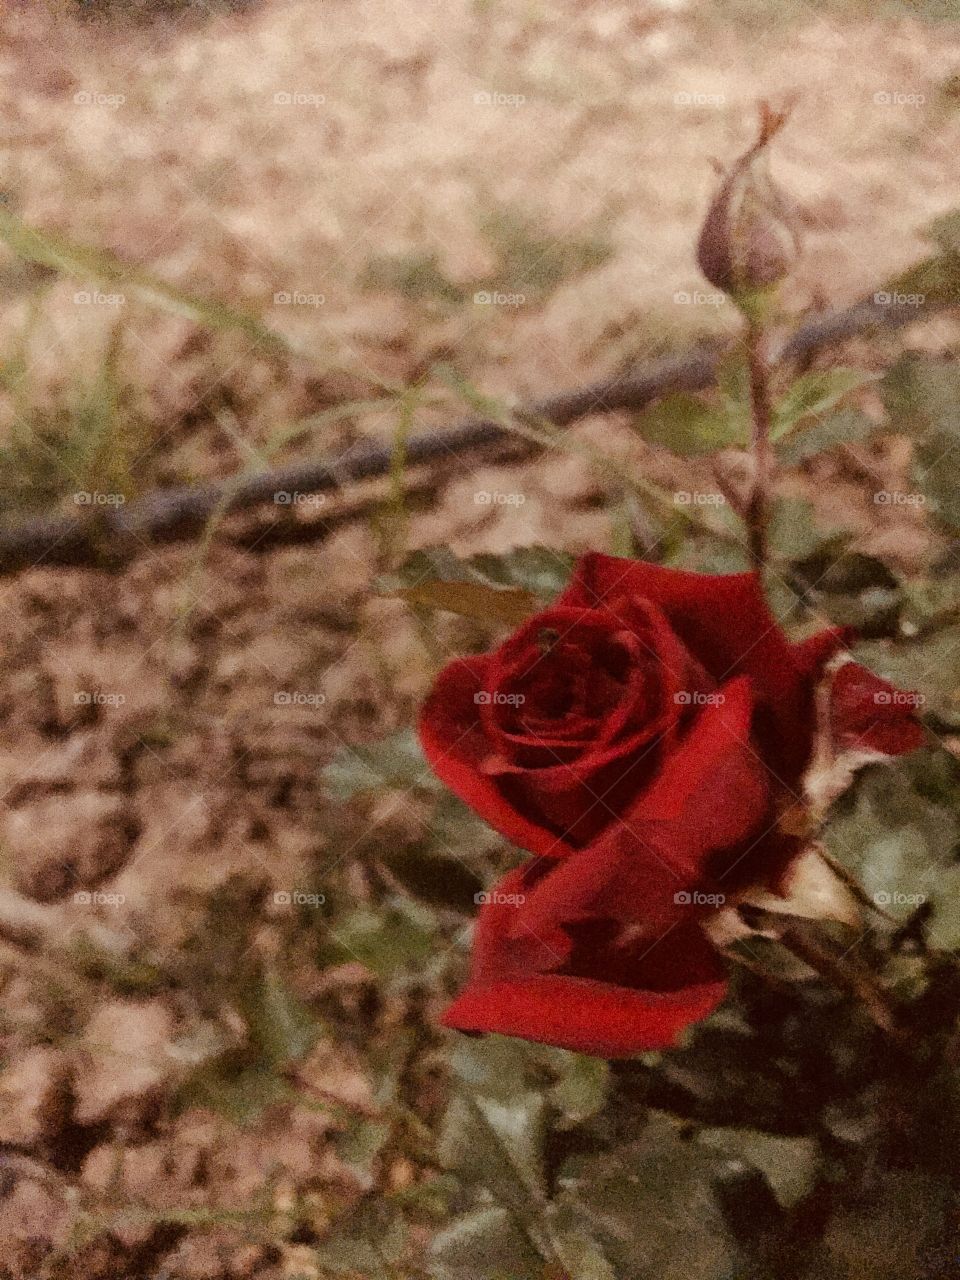 The Bloody Rose.